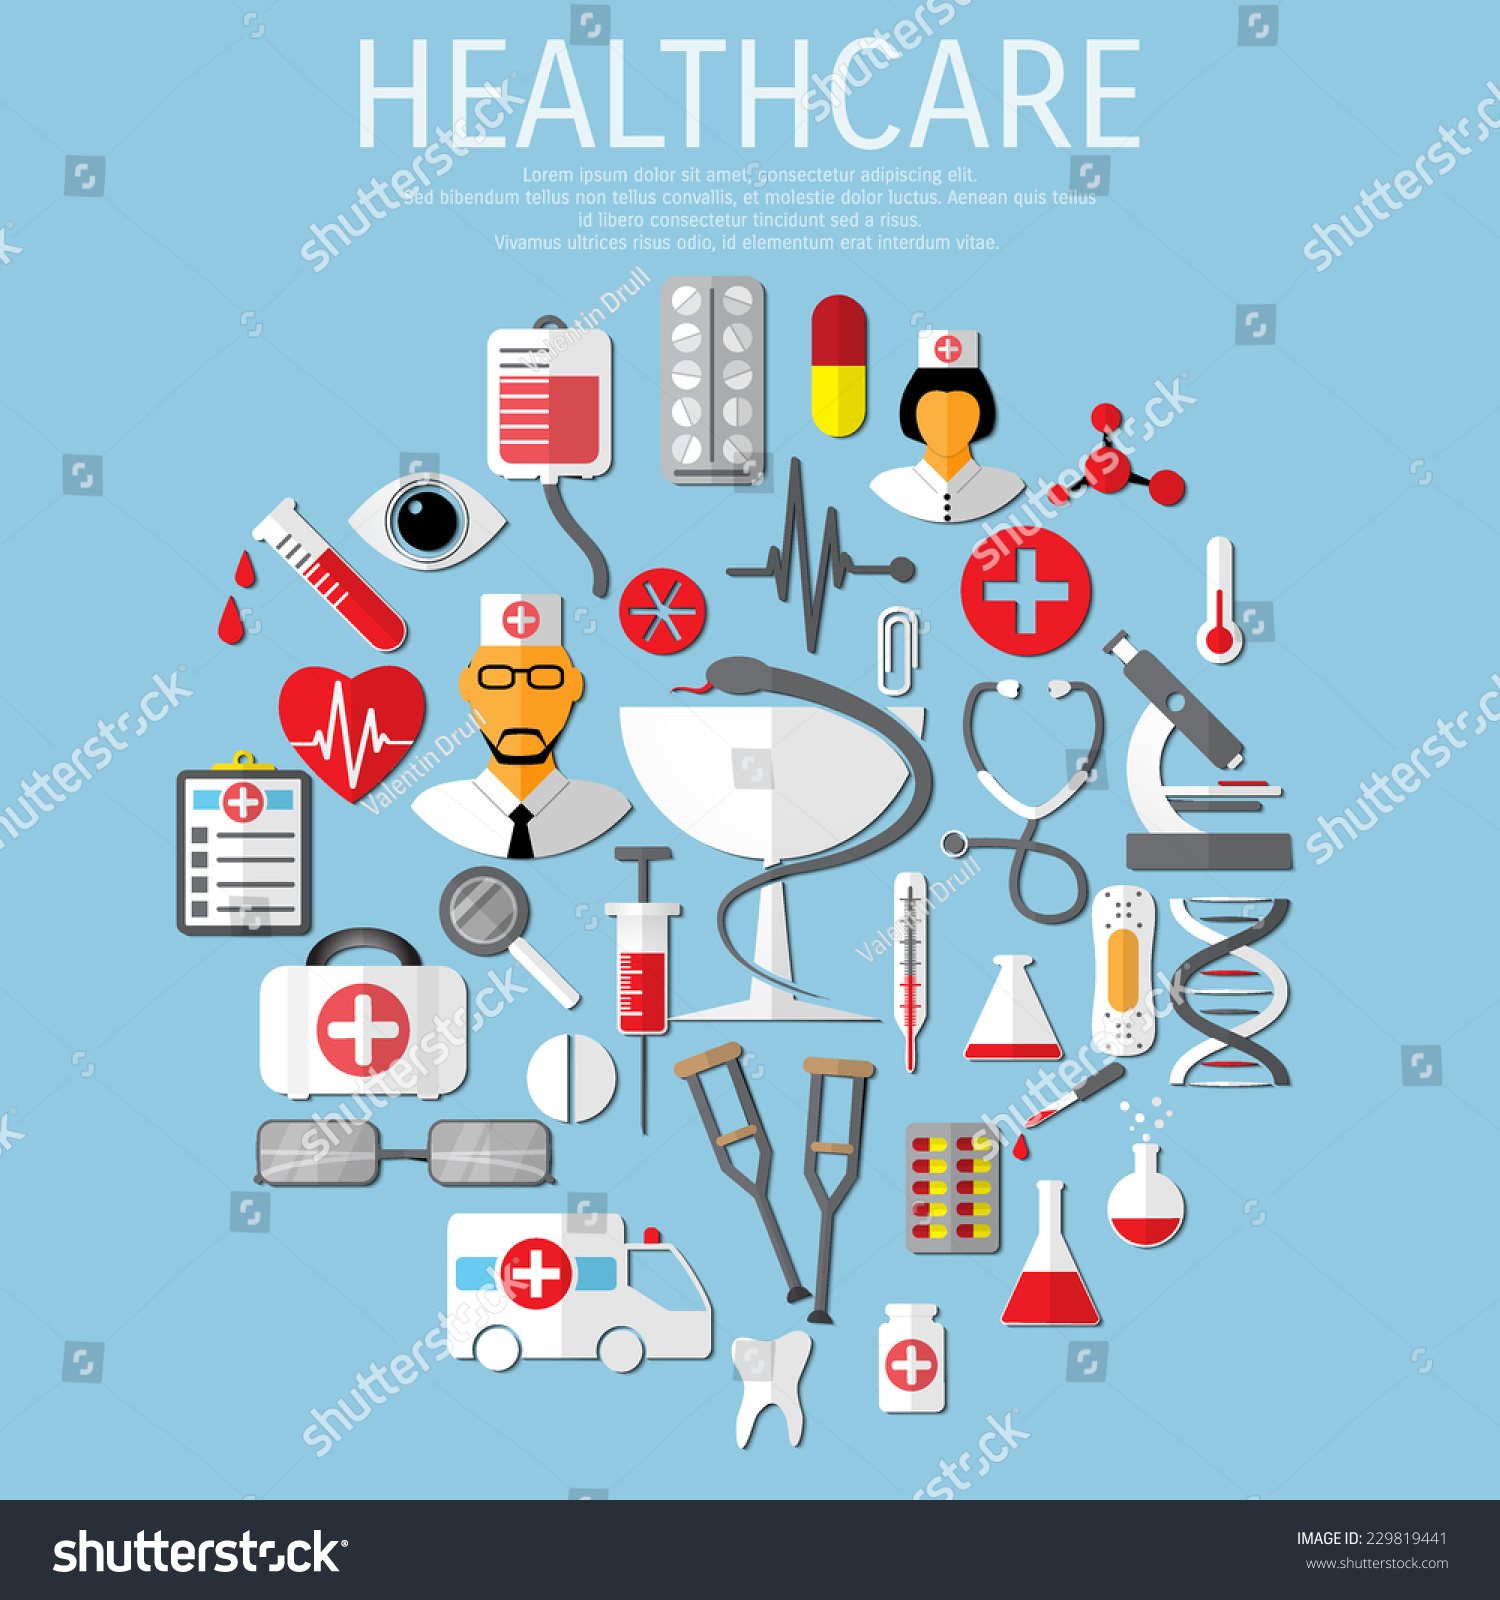 Image result for research healthcare